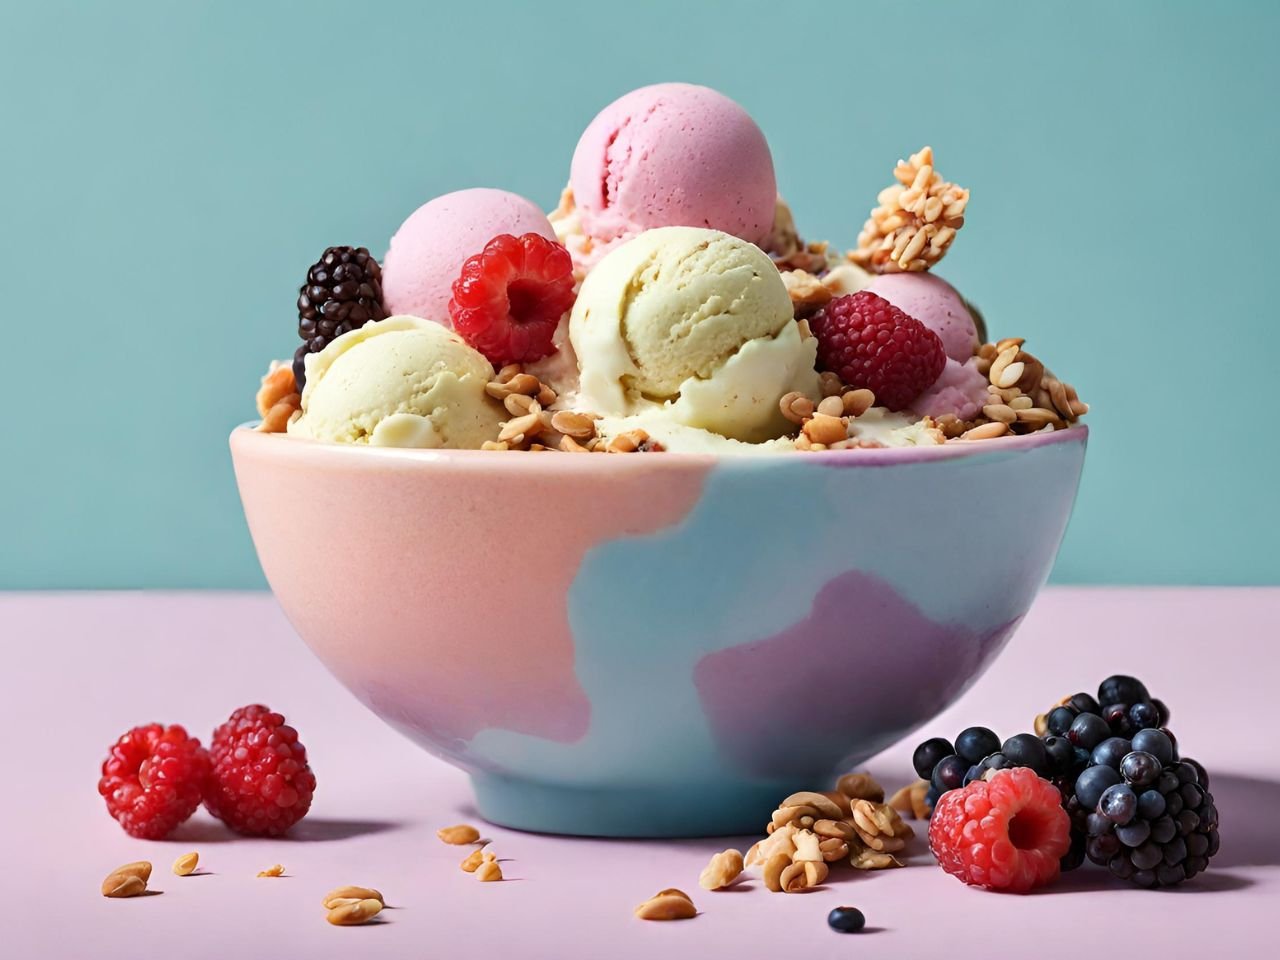 The 10 Best Gluten-Free Ice Creams to Satisfy Your Sweet Tooth Without the Guilt 0